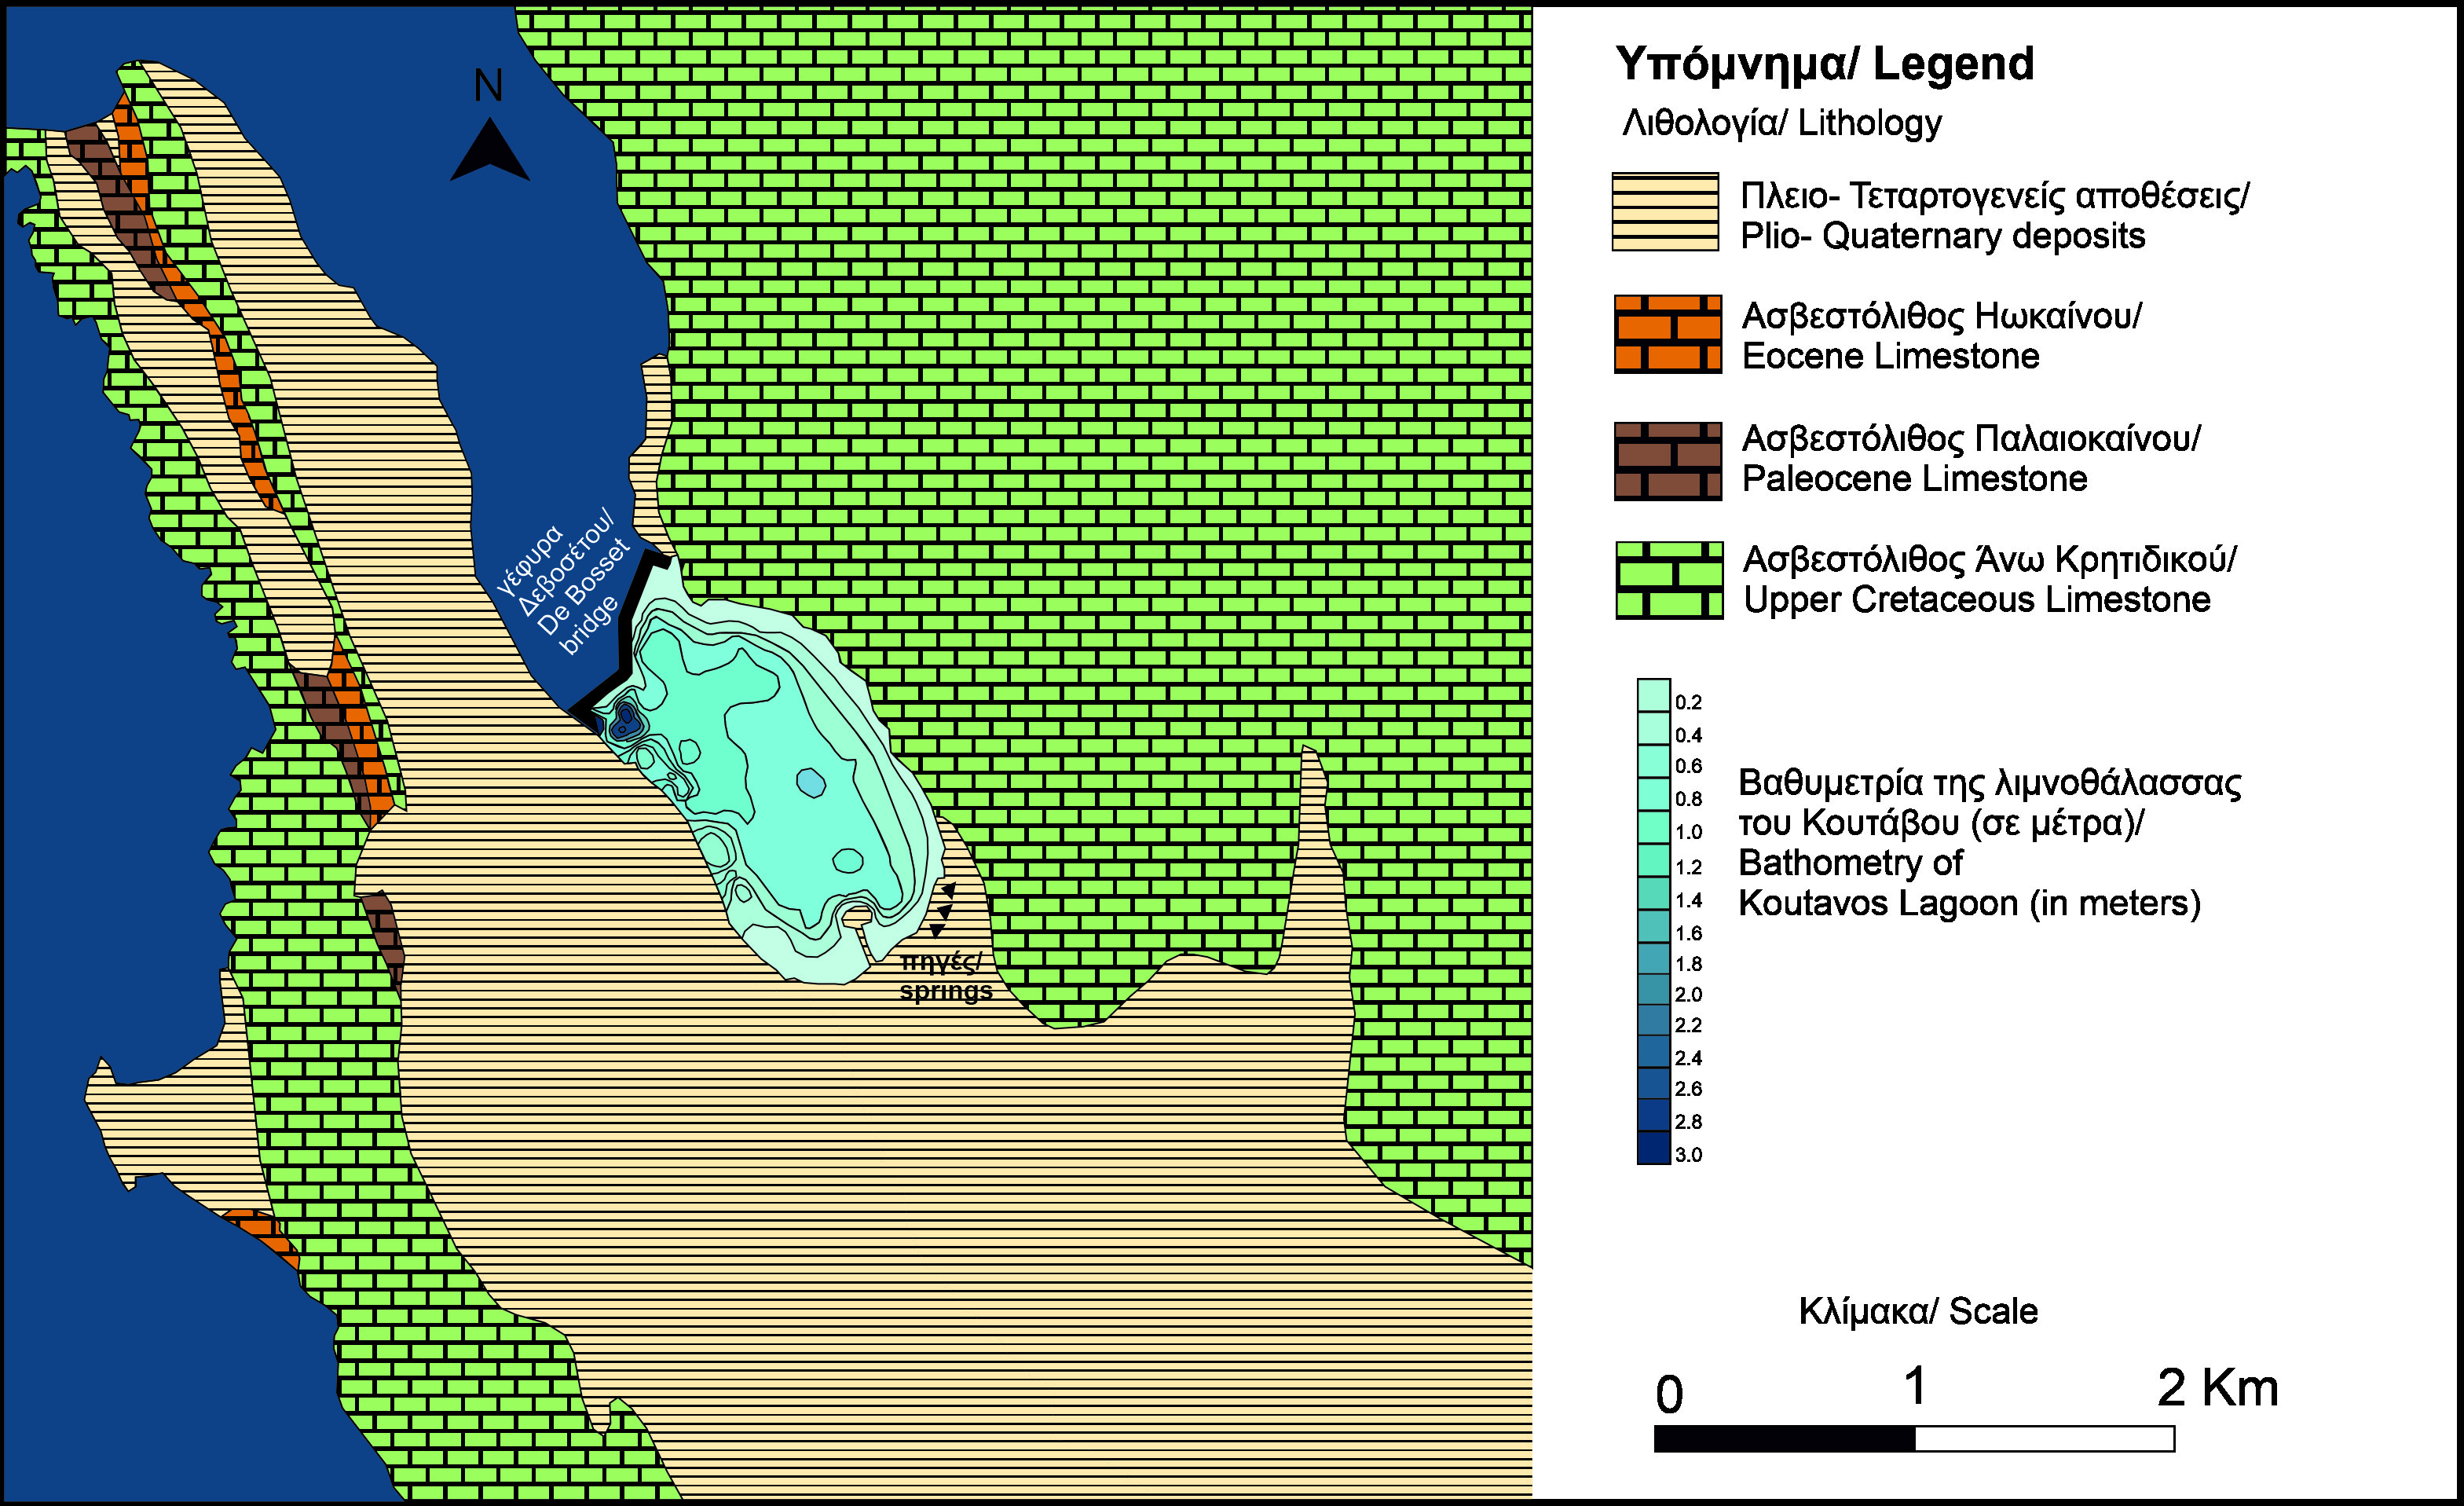 Simplified geological map of the area of Argostoli showing Koutavos Lagoon and its bathymetry as well